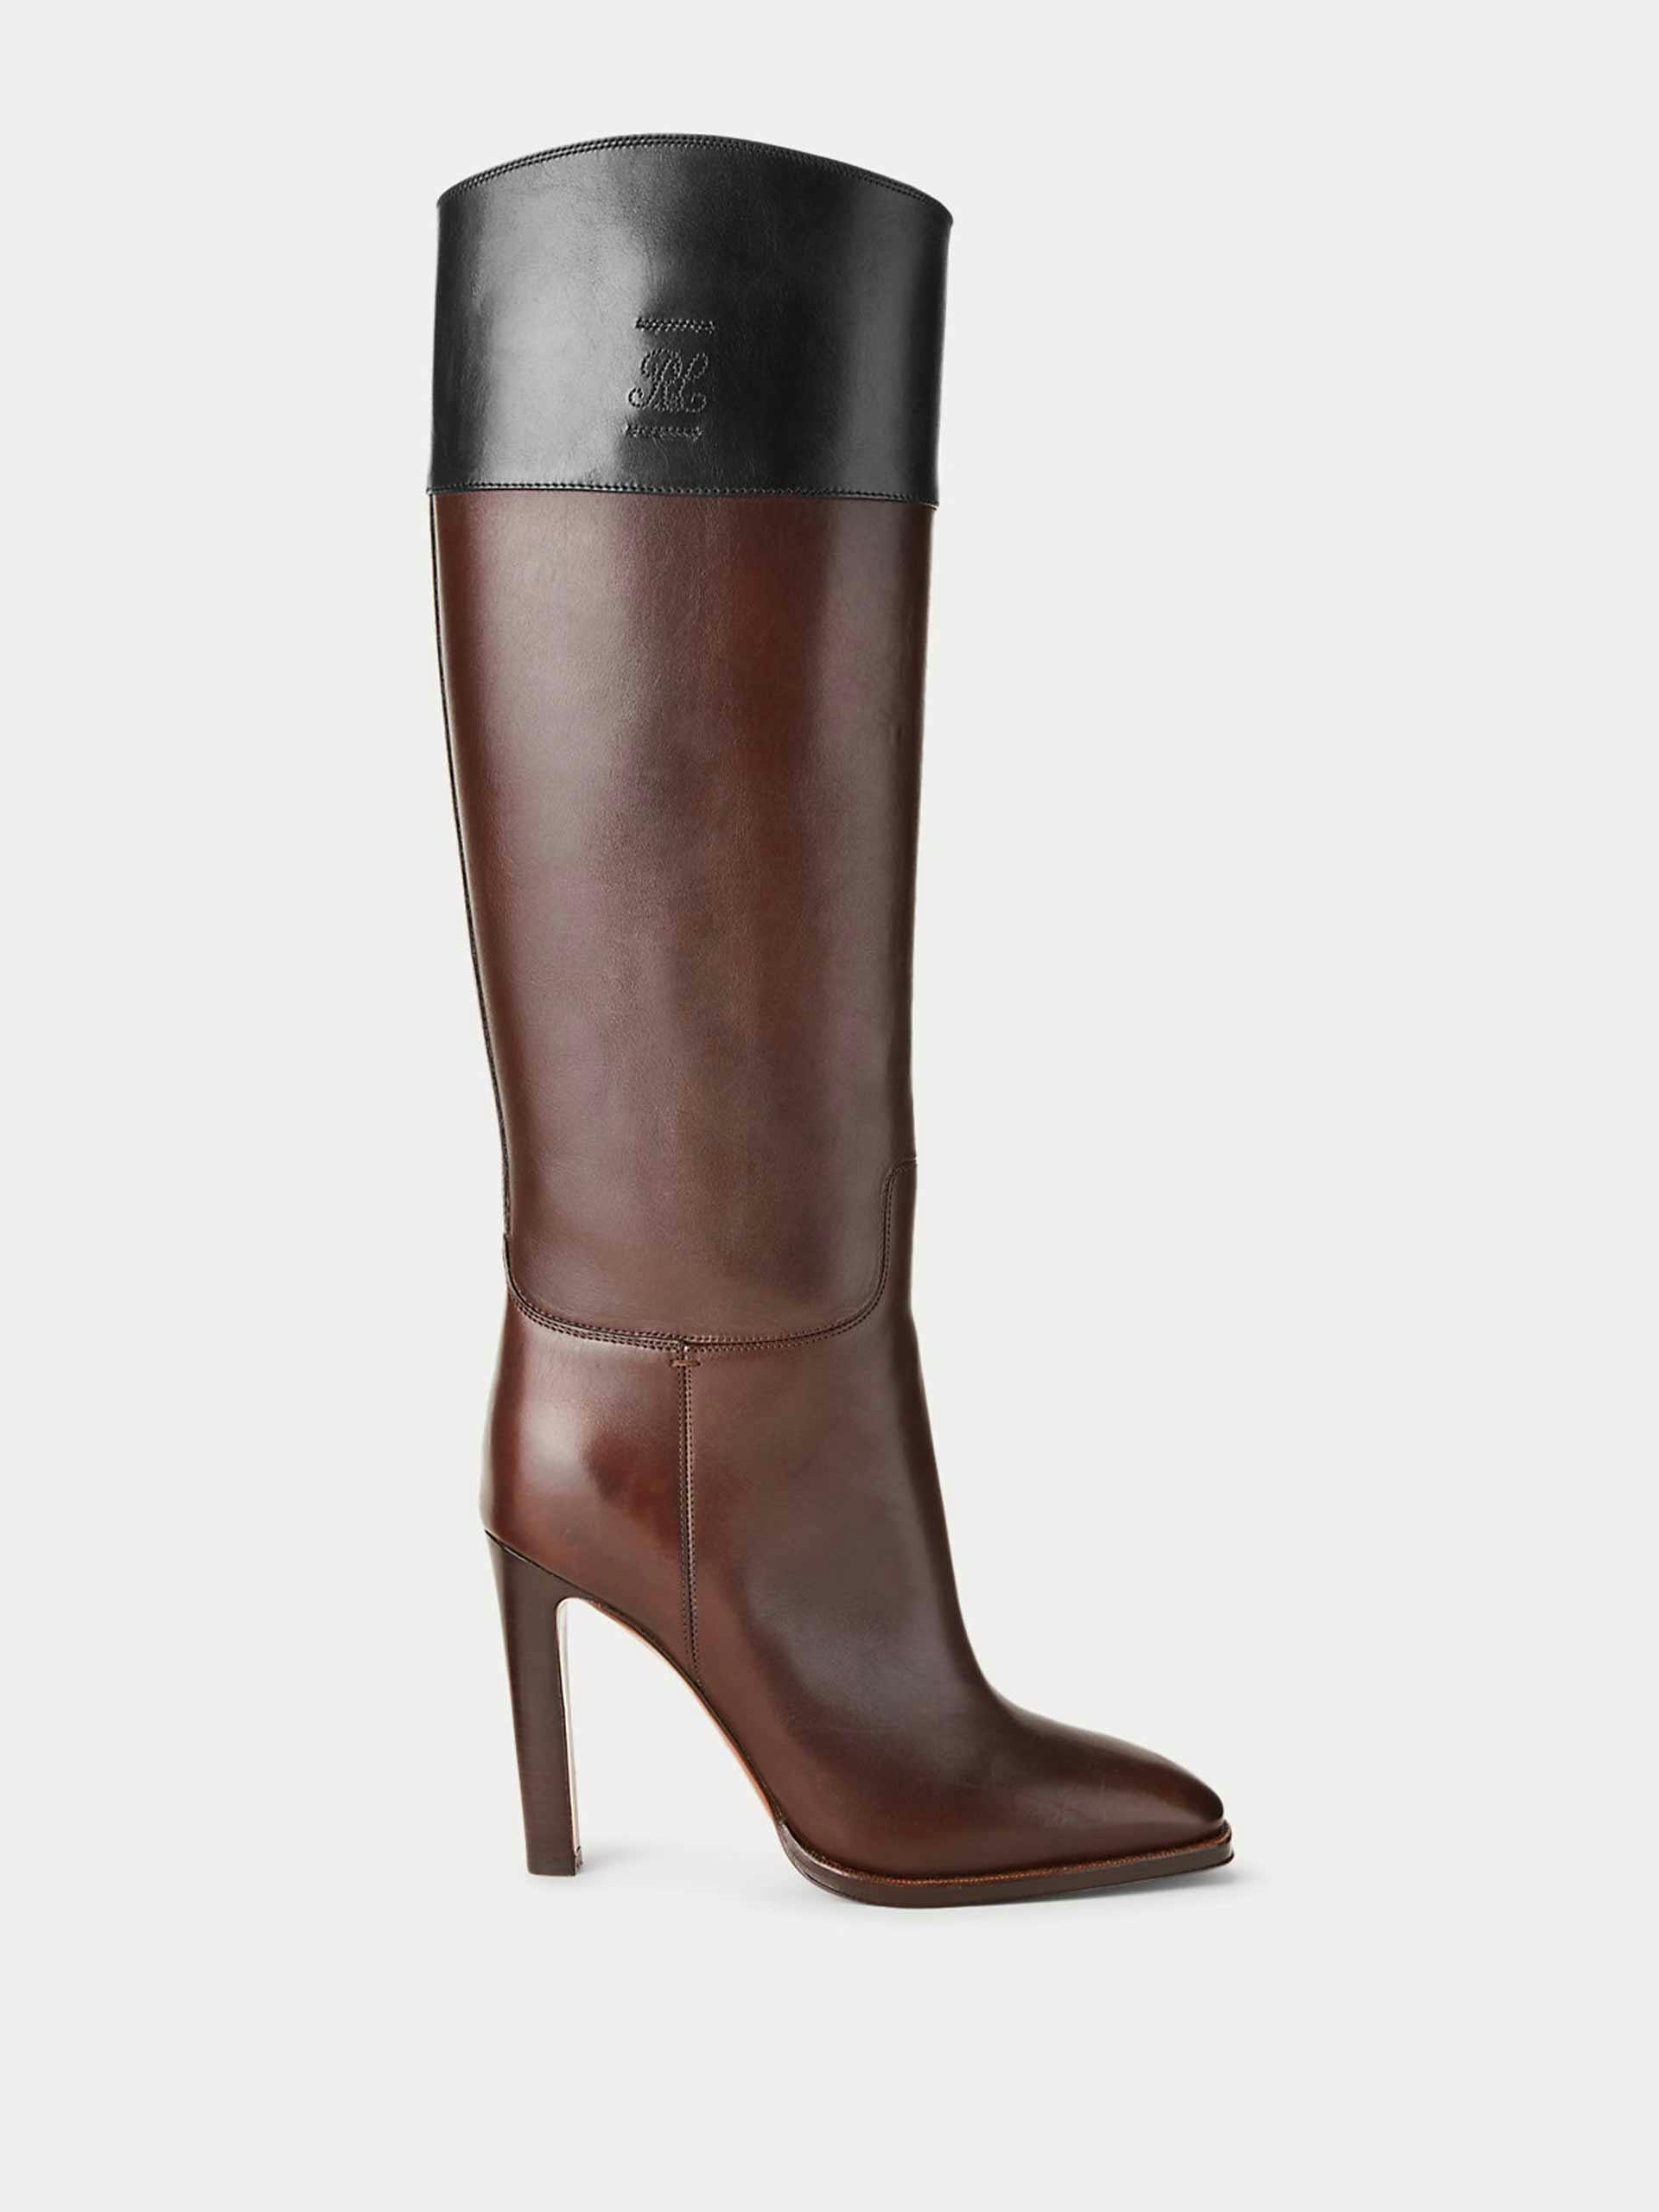 Brown and black leather heeled boots